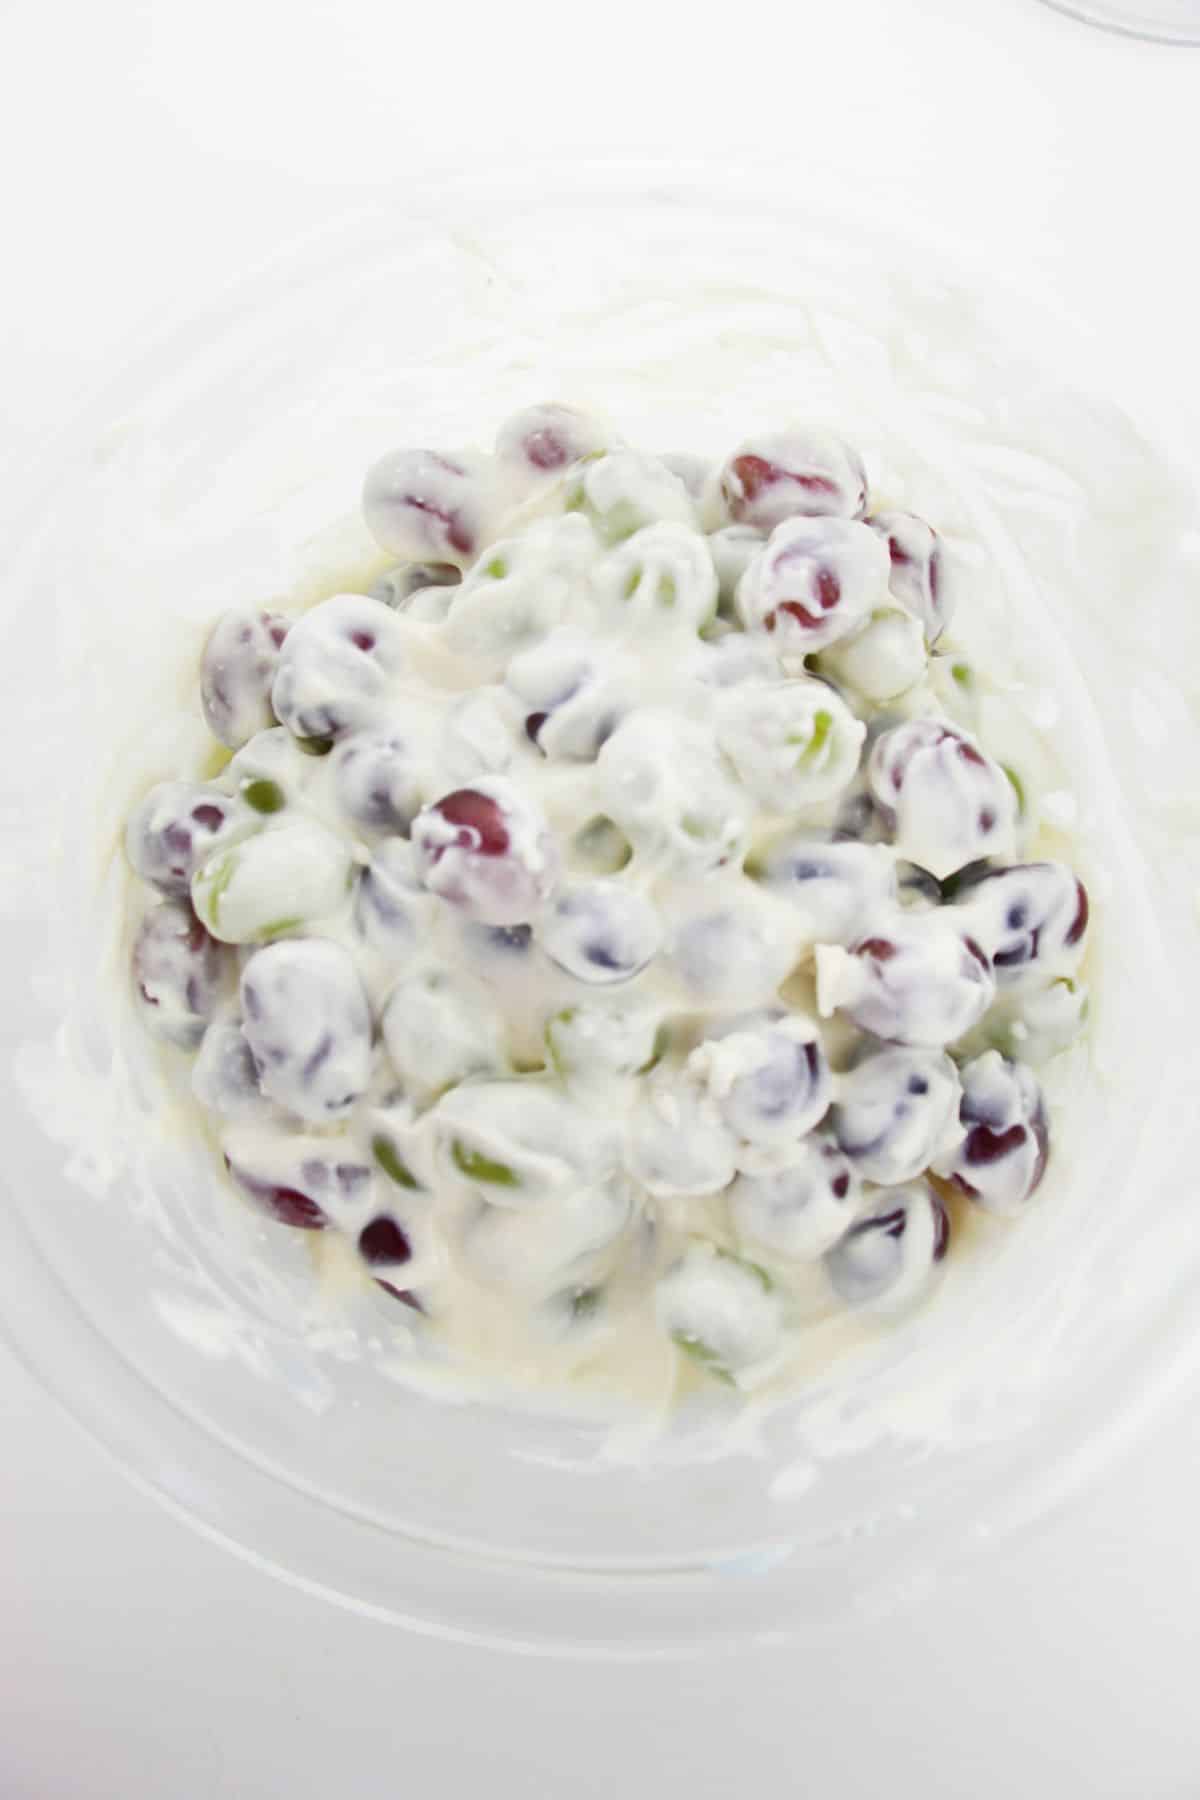 Grapes are added to the cream mixture in a large bowl.